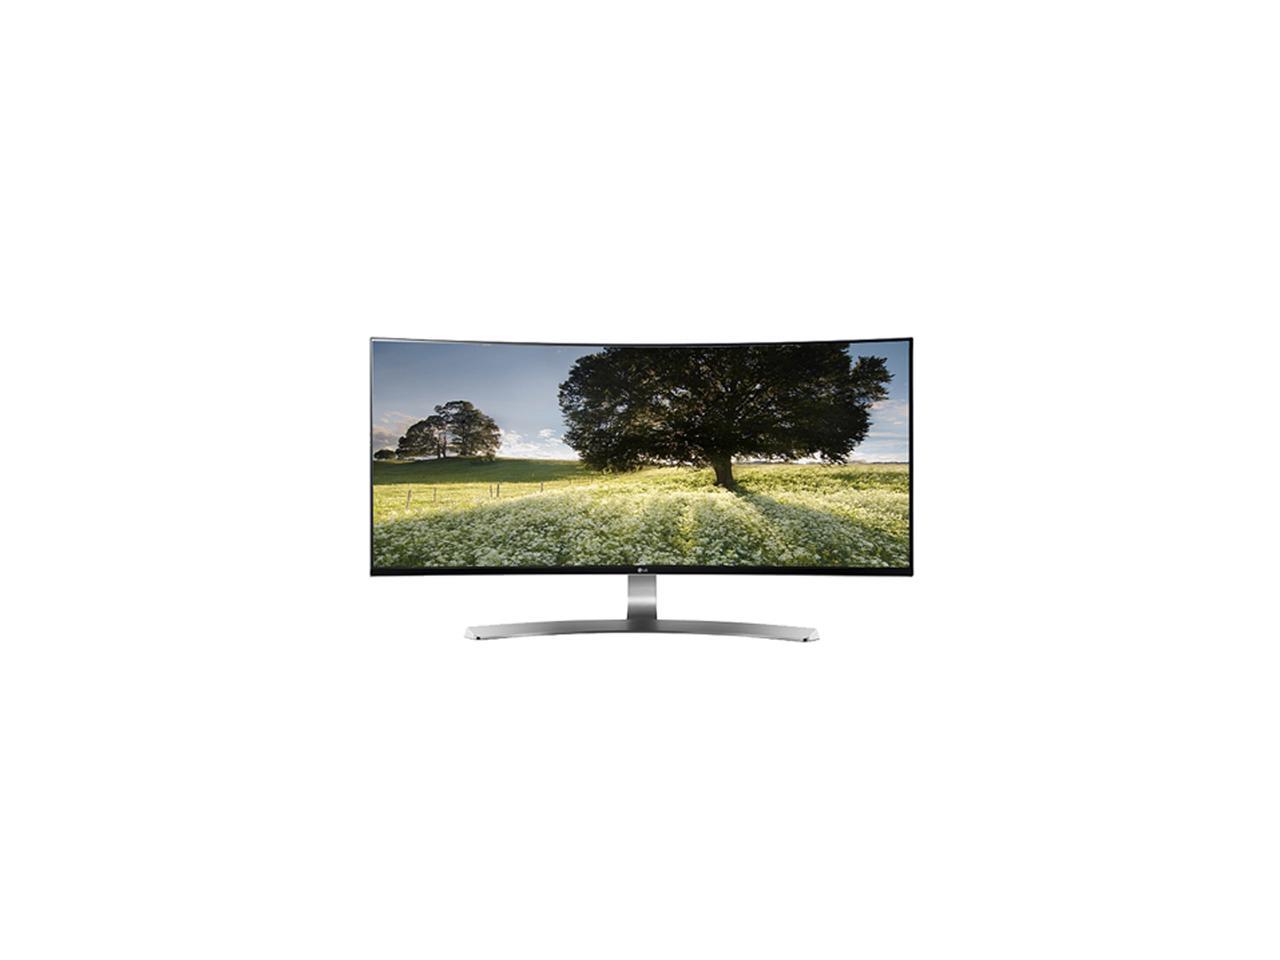 LG 34UC98-W 34" Curved FreeSync IPS Monitor 3440 x 1440 WQHD 5ms 21:9 UltraWide On-Screen Control with 4-way Screen Split, Thunderbolt 2.0 and USB 3.0 Quick Charge